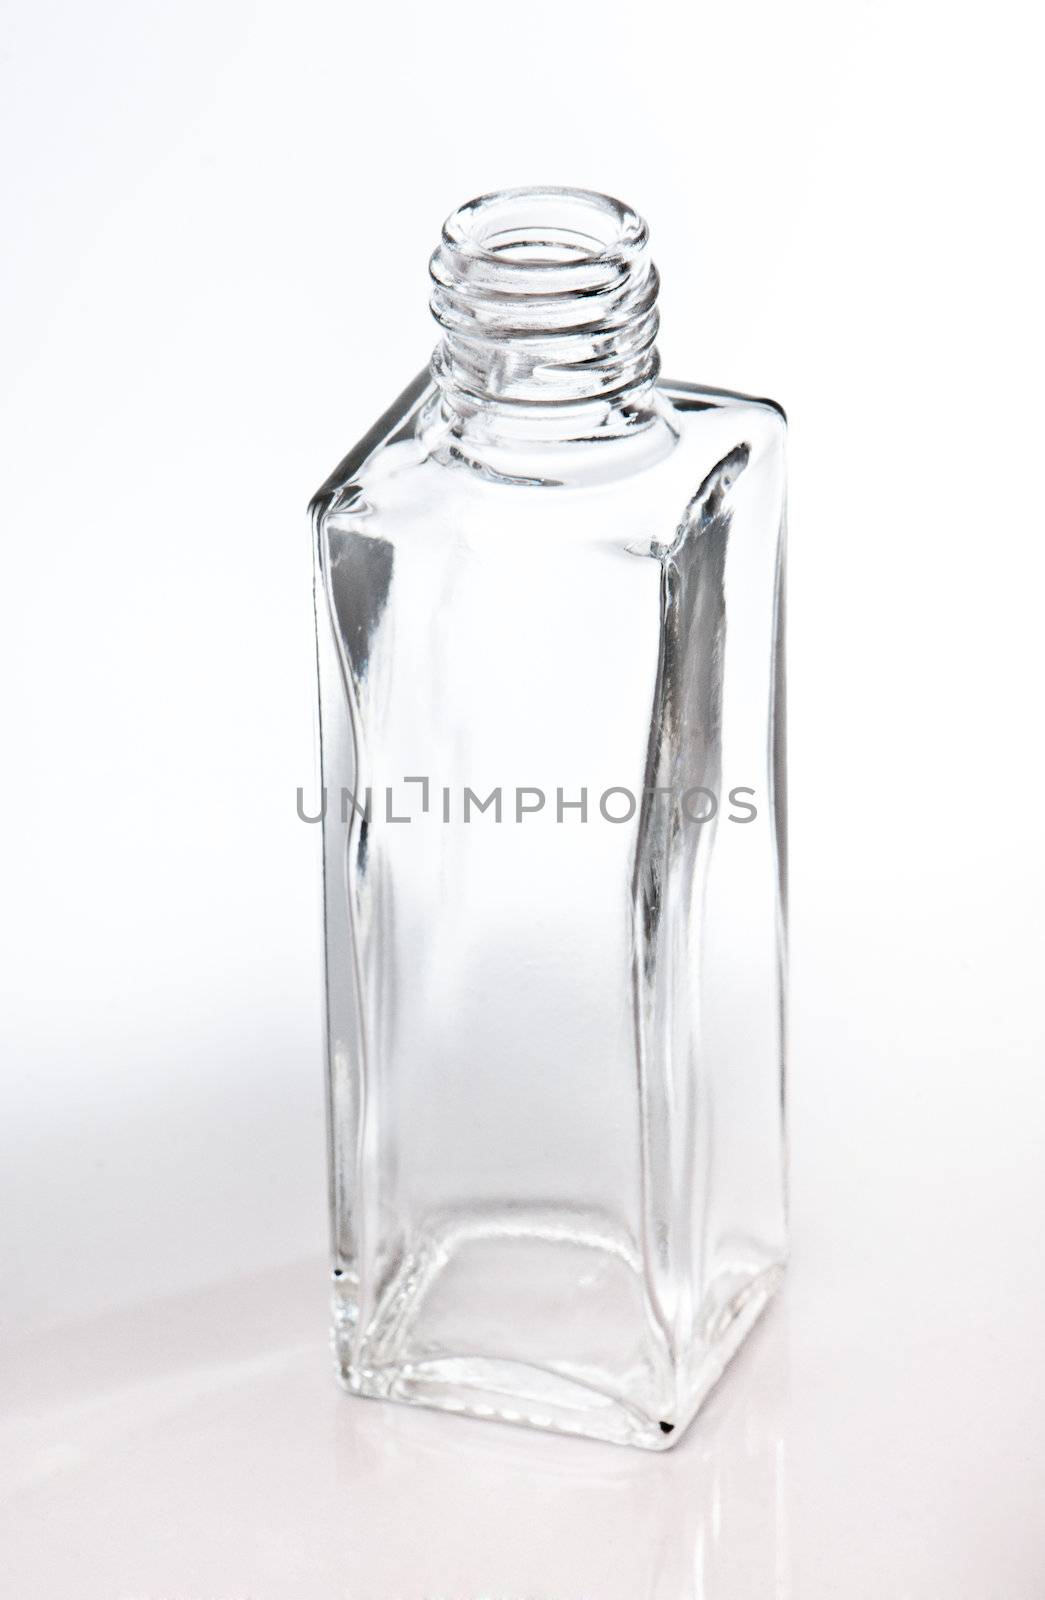 empty glass perfume bottle over a light backgroung